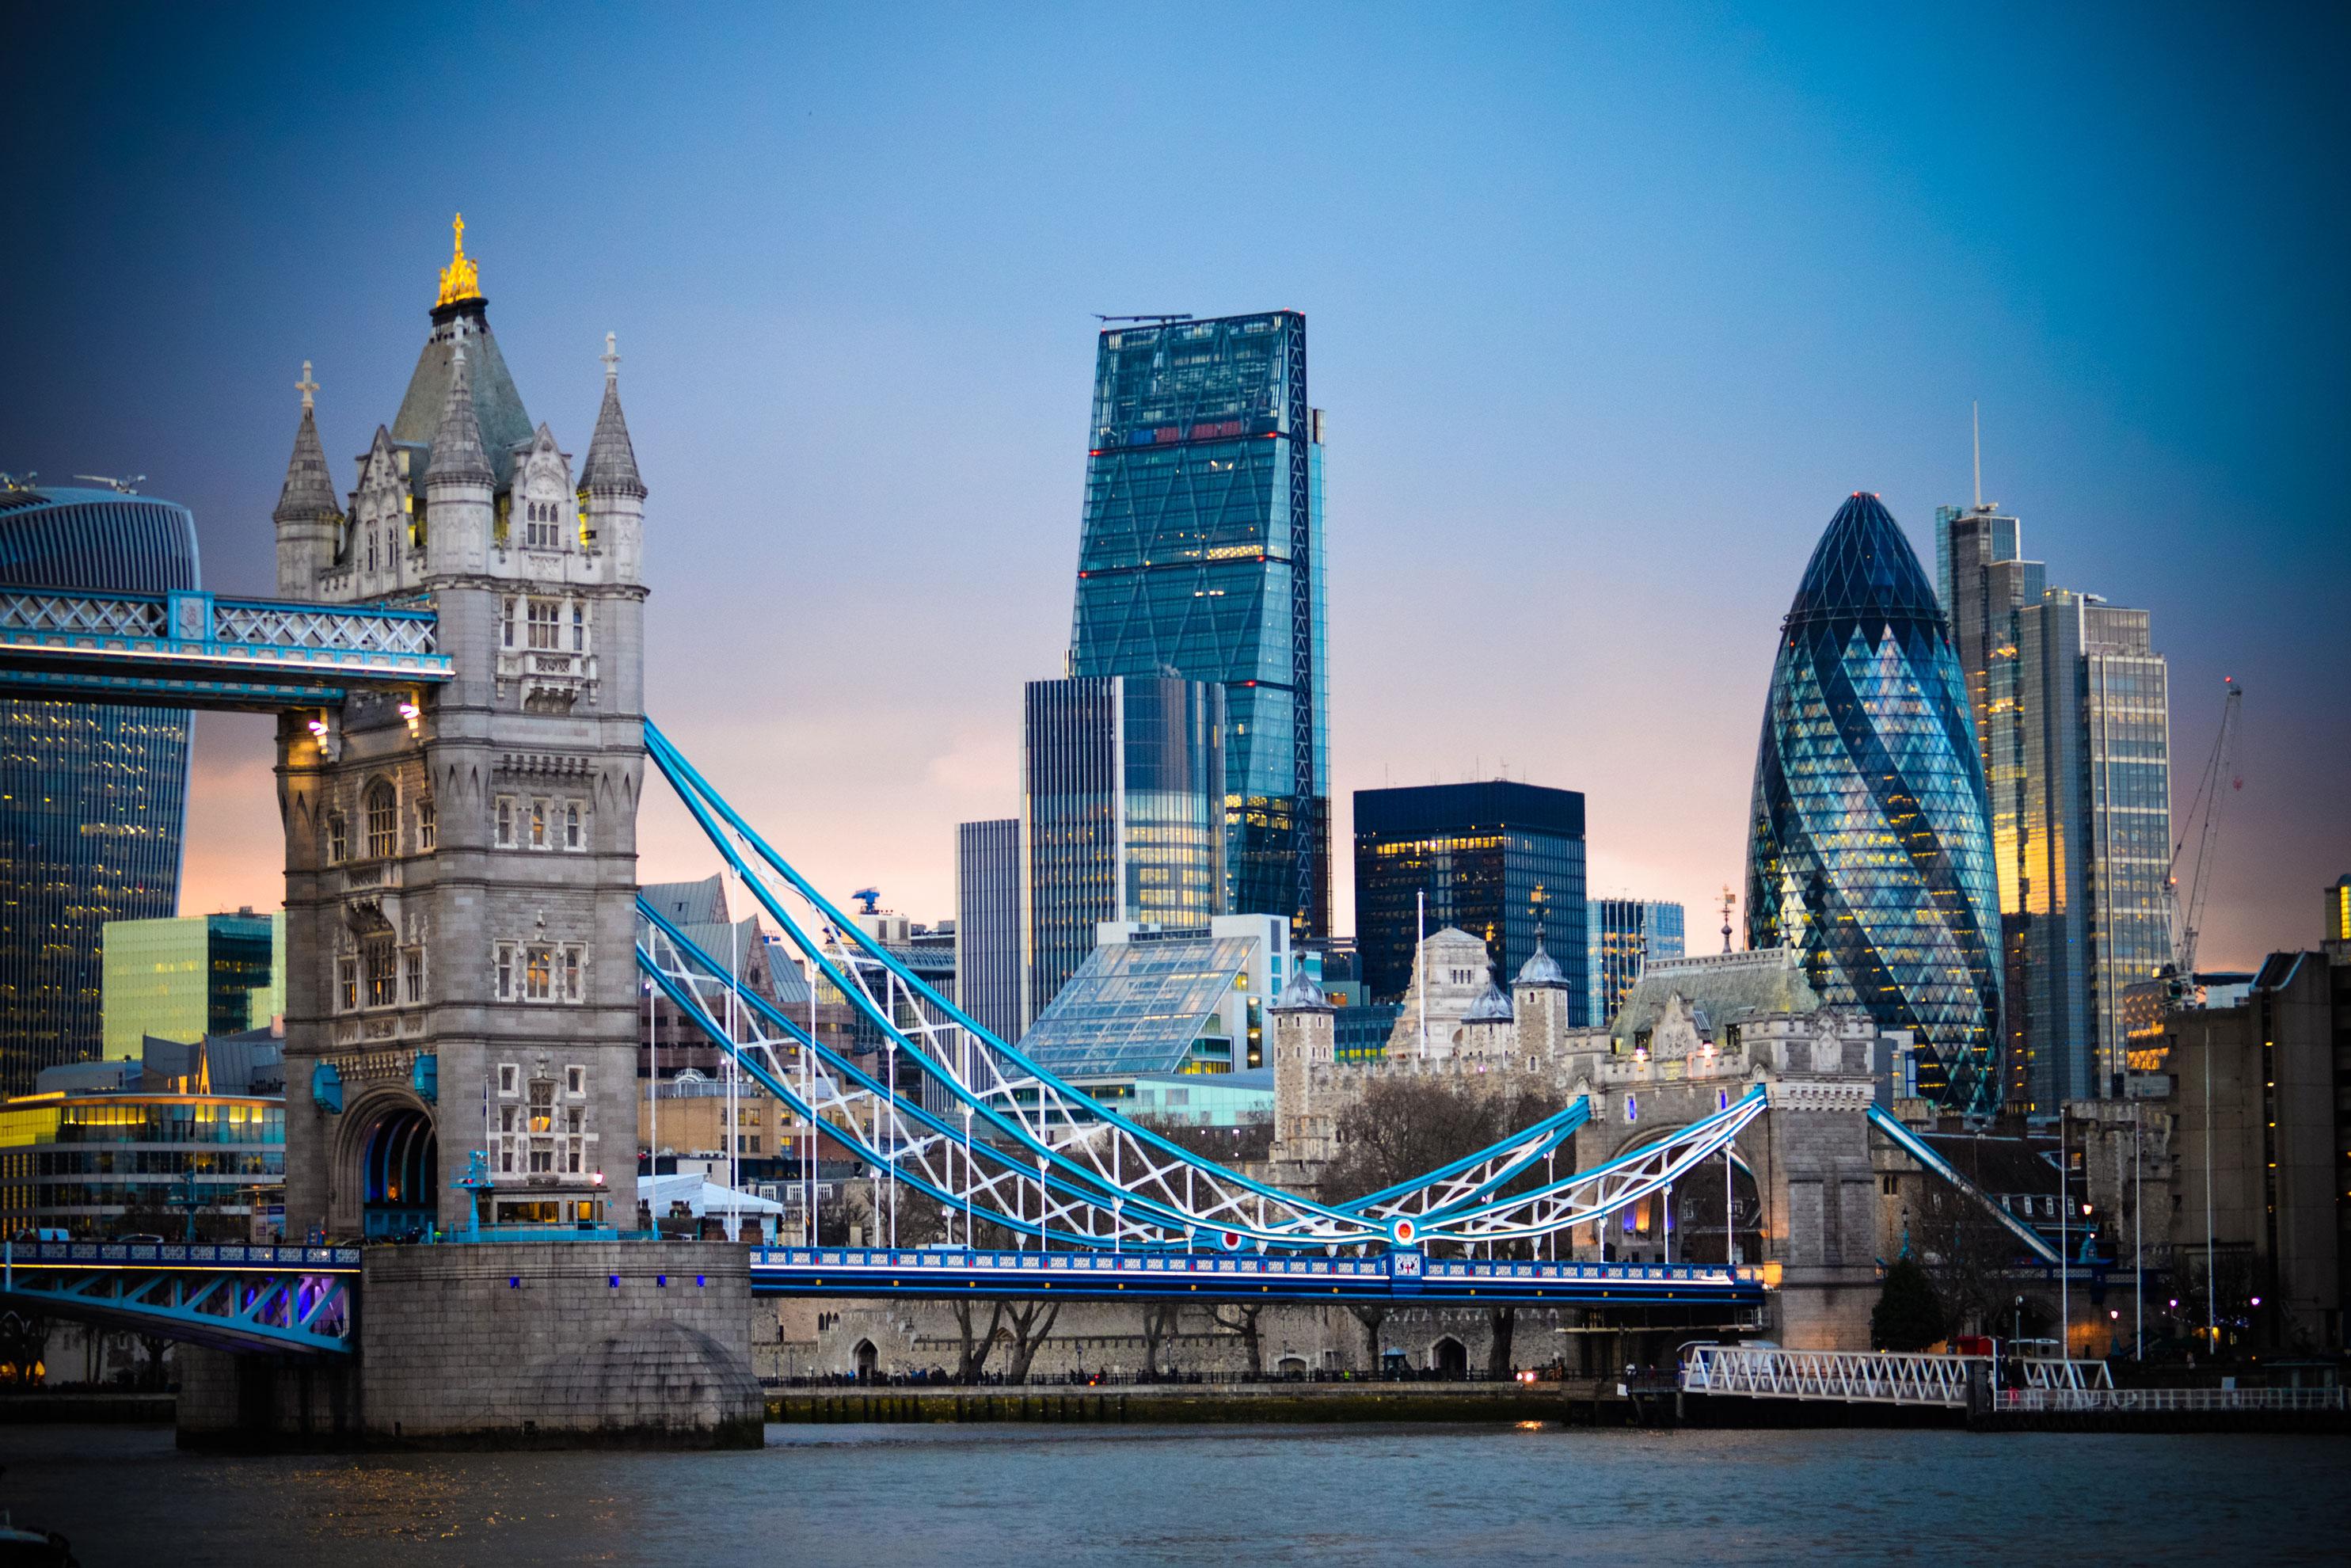 Experience the London Bridge with United Kingdom vacation packages